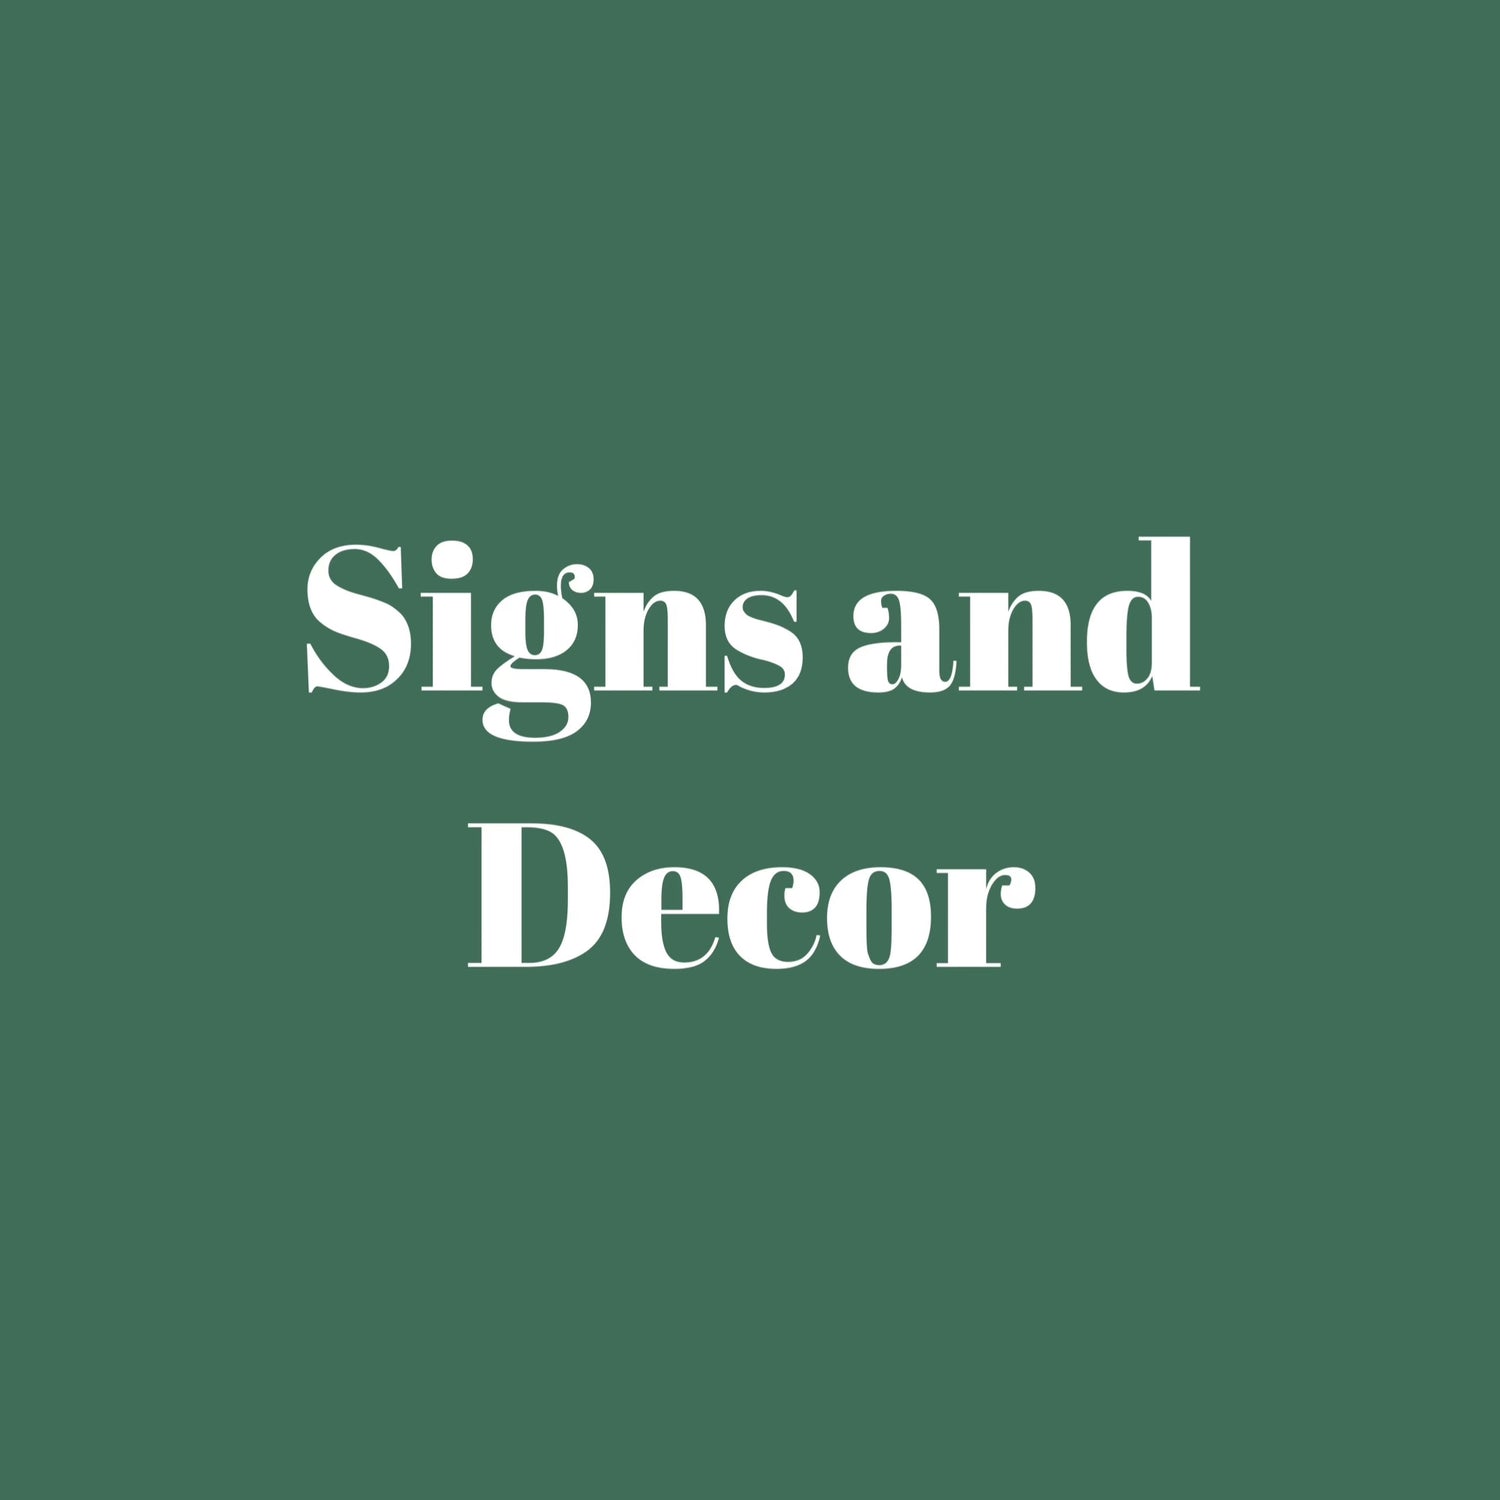 Signs and Decor